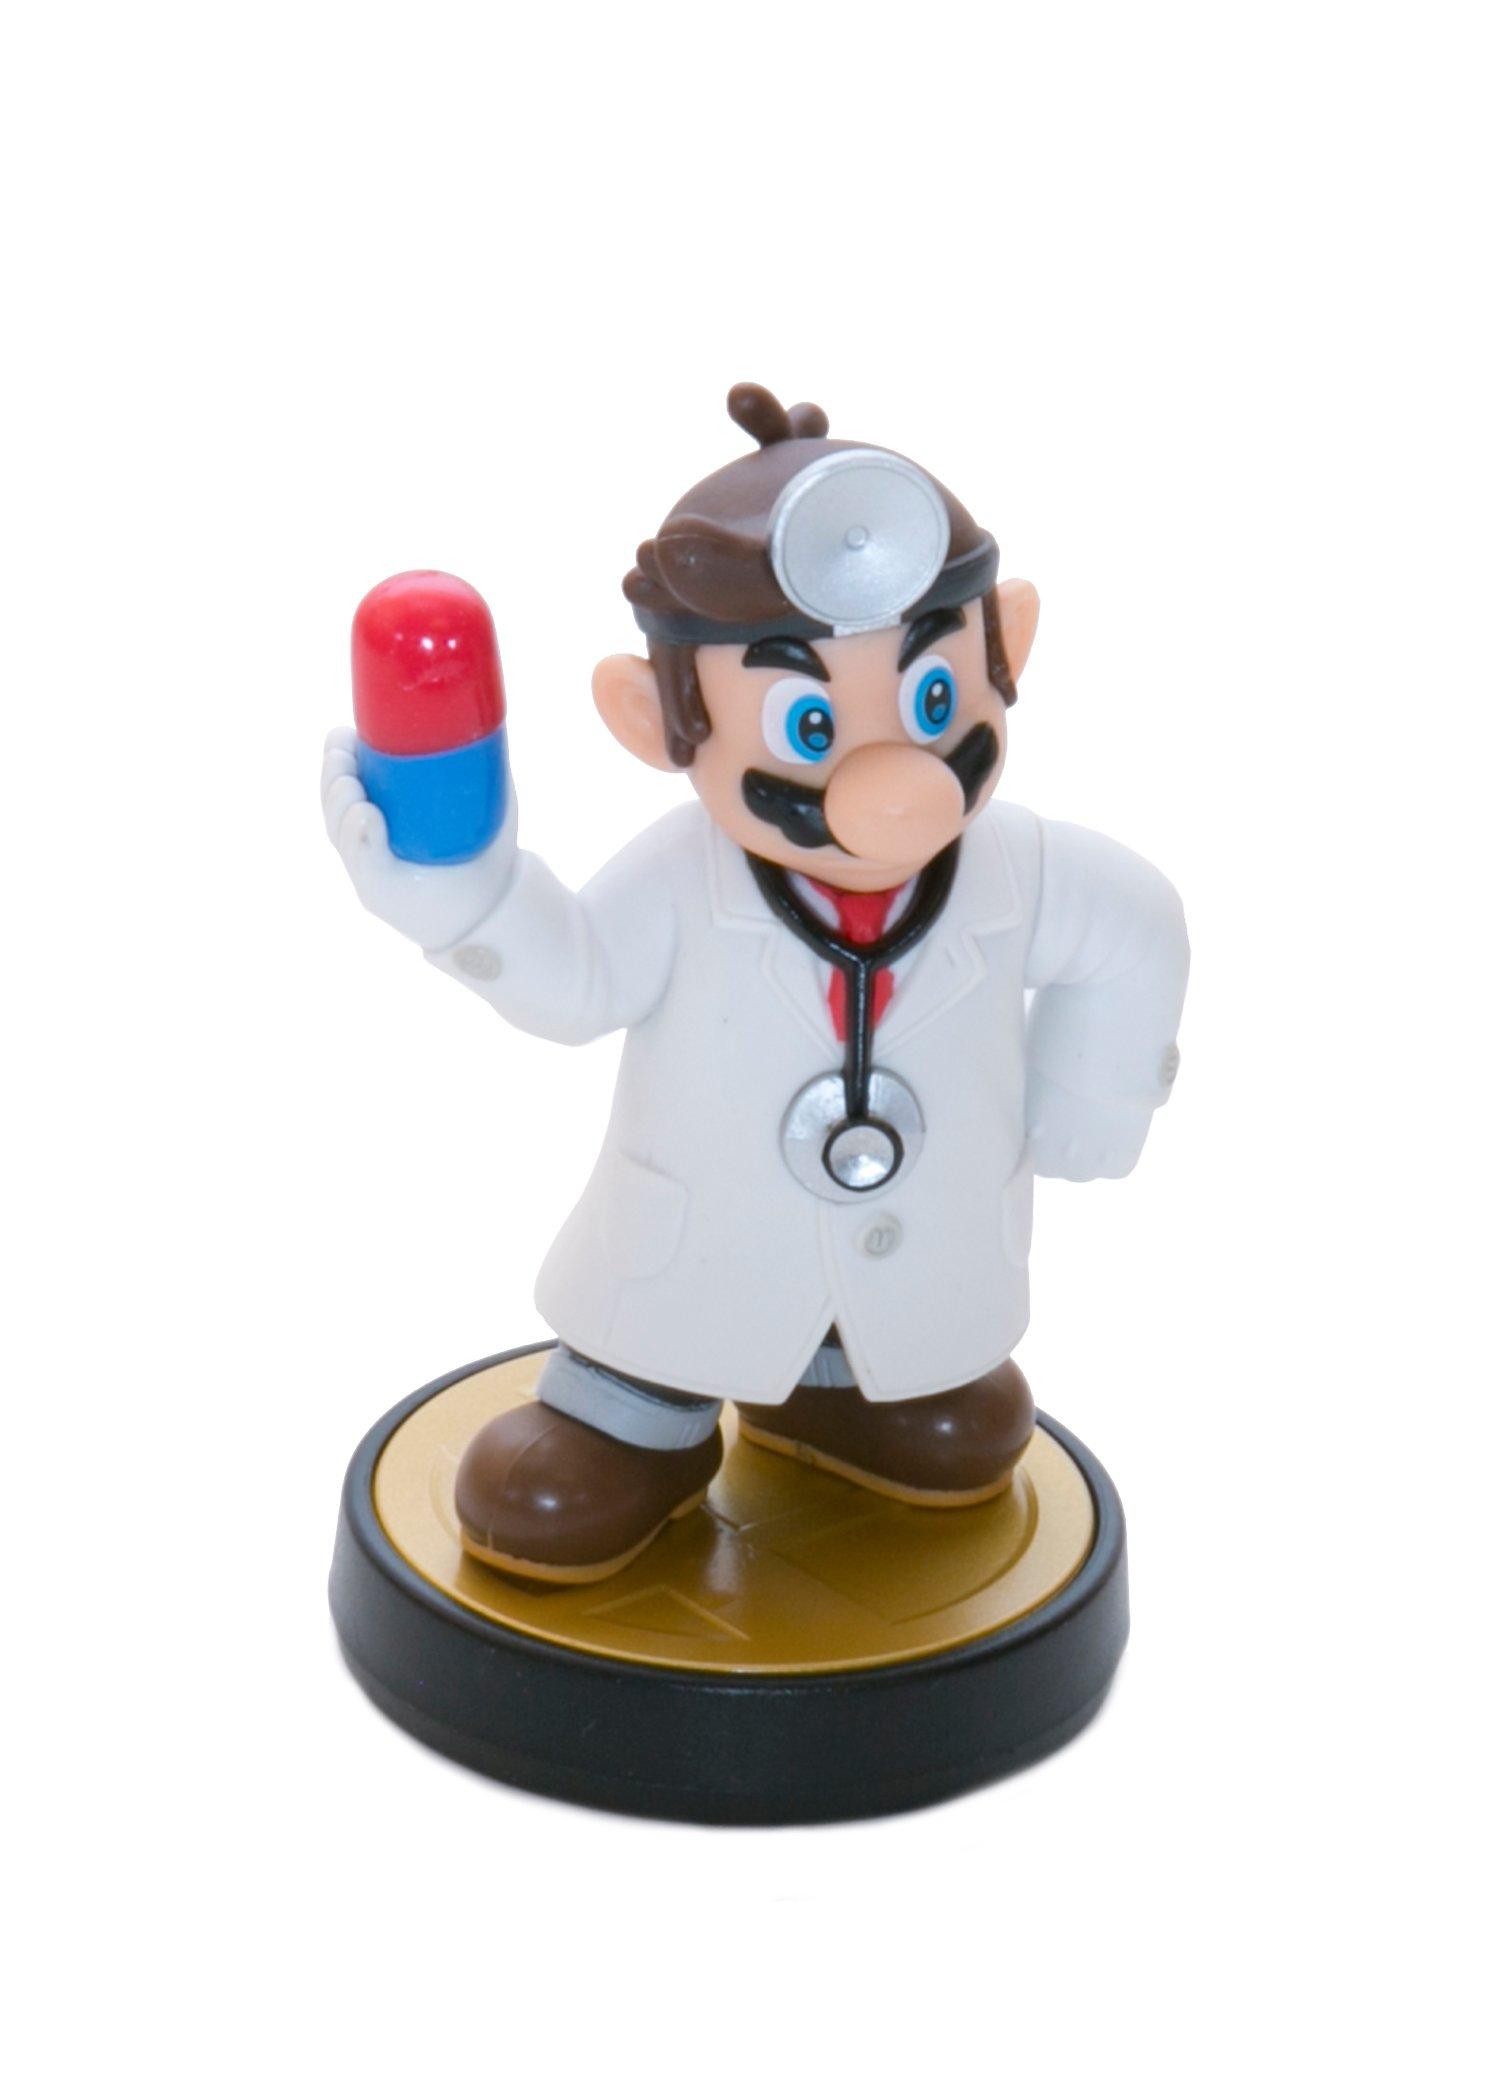 dr mario switch release date